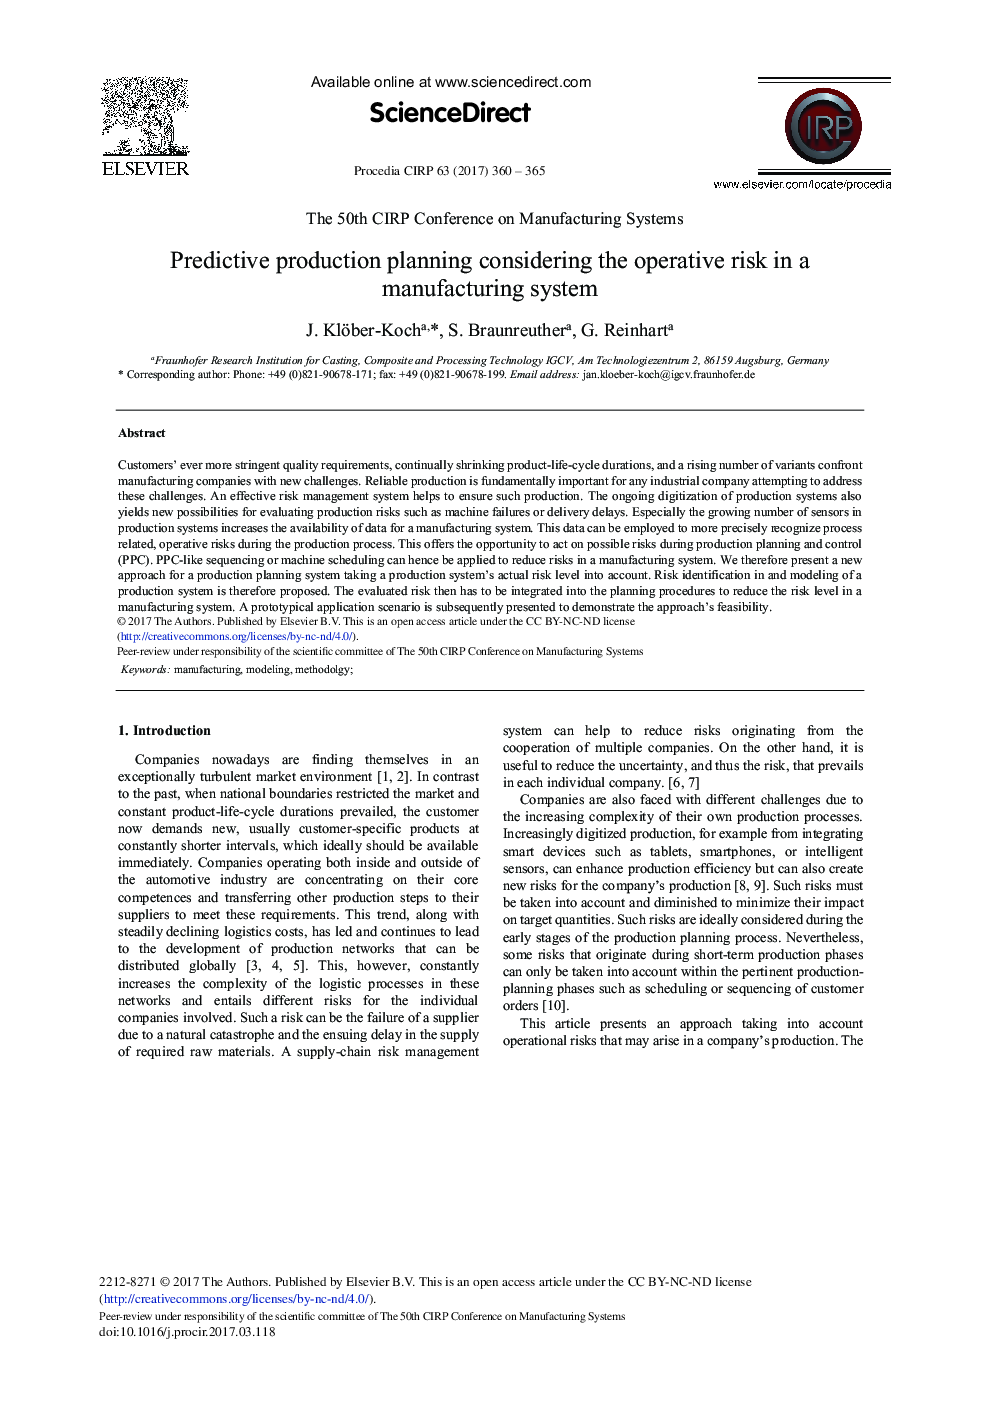 Predictive Production Planning Considering the Operative Risk in a Manufacturing System